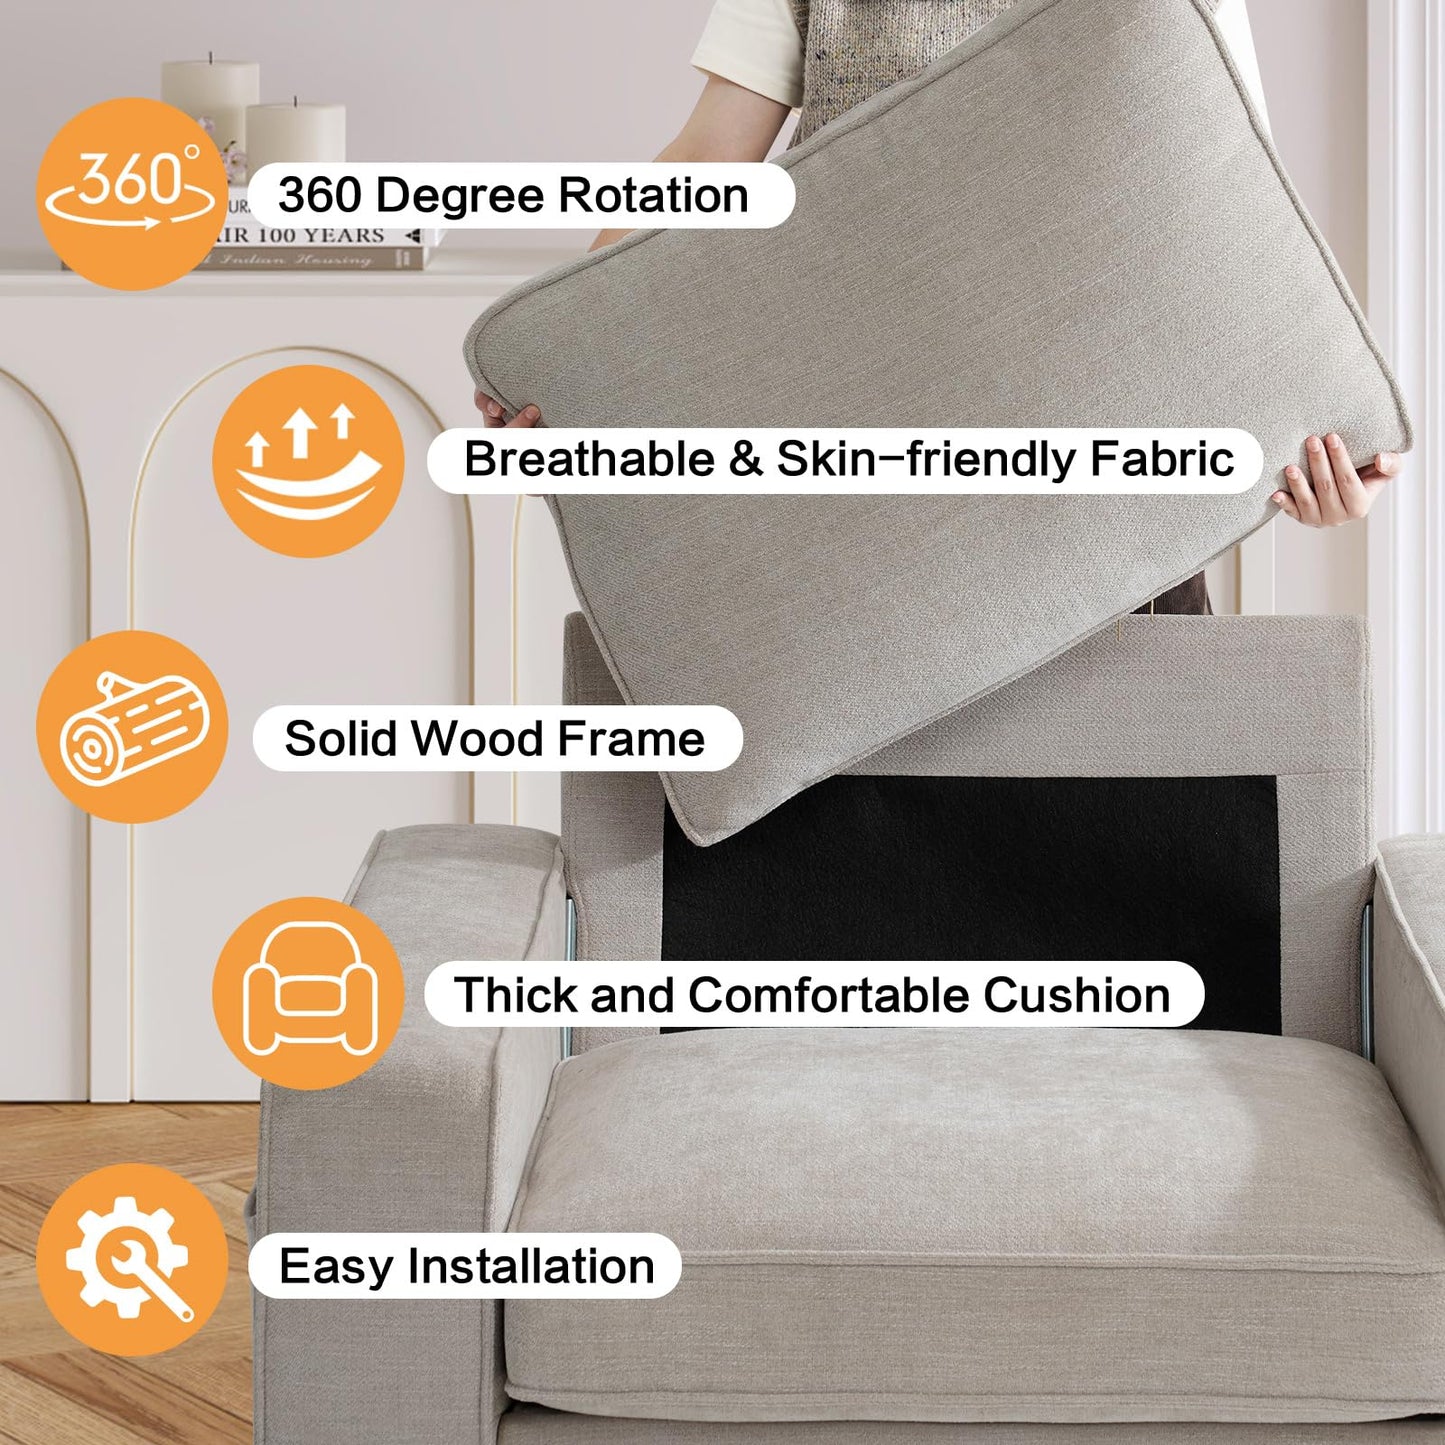 COOSLEEP Swivel Single Accent Sofa in Performance Fabric, 4.75“Extra Wide Armrests, Removable Cloth Cover,Steel and Wood Construction up to 350 LBS for Living Room Bedroom (Beige)